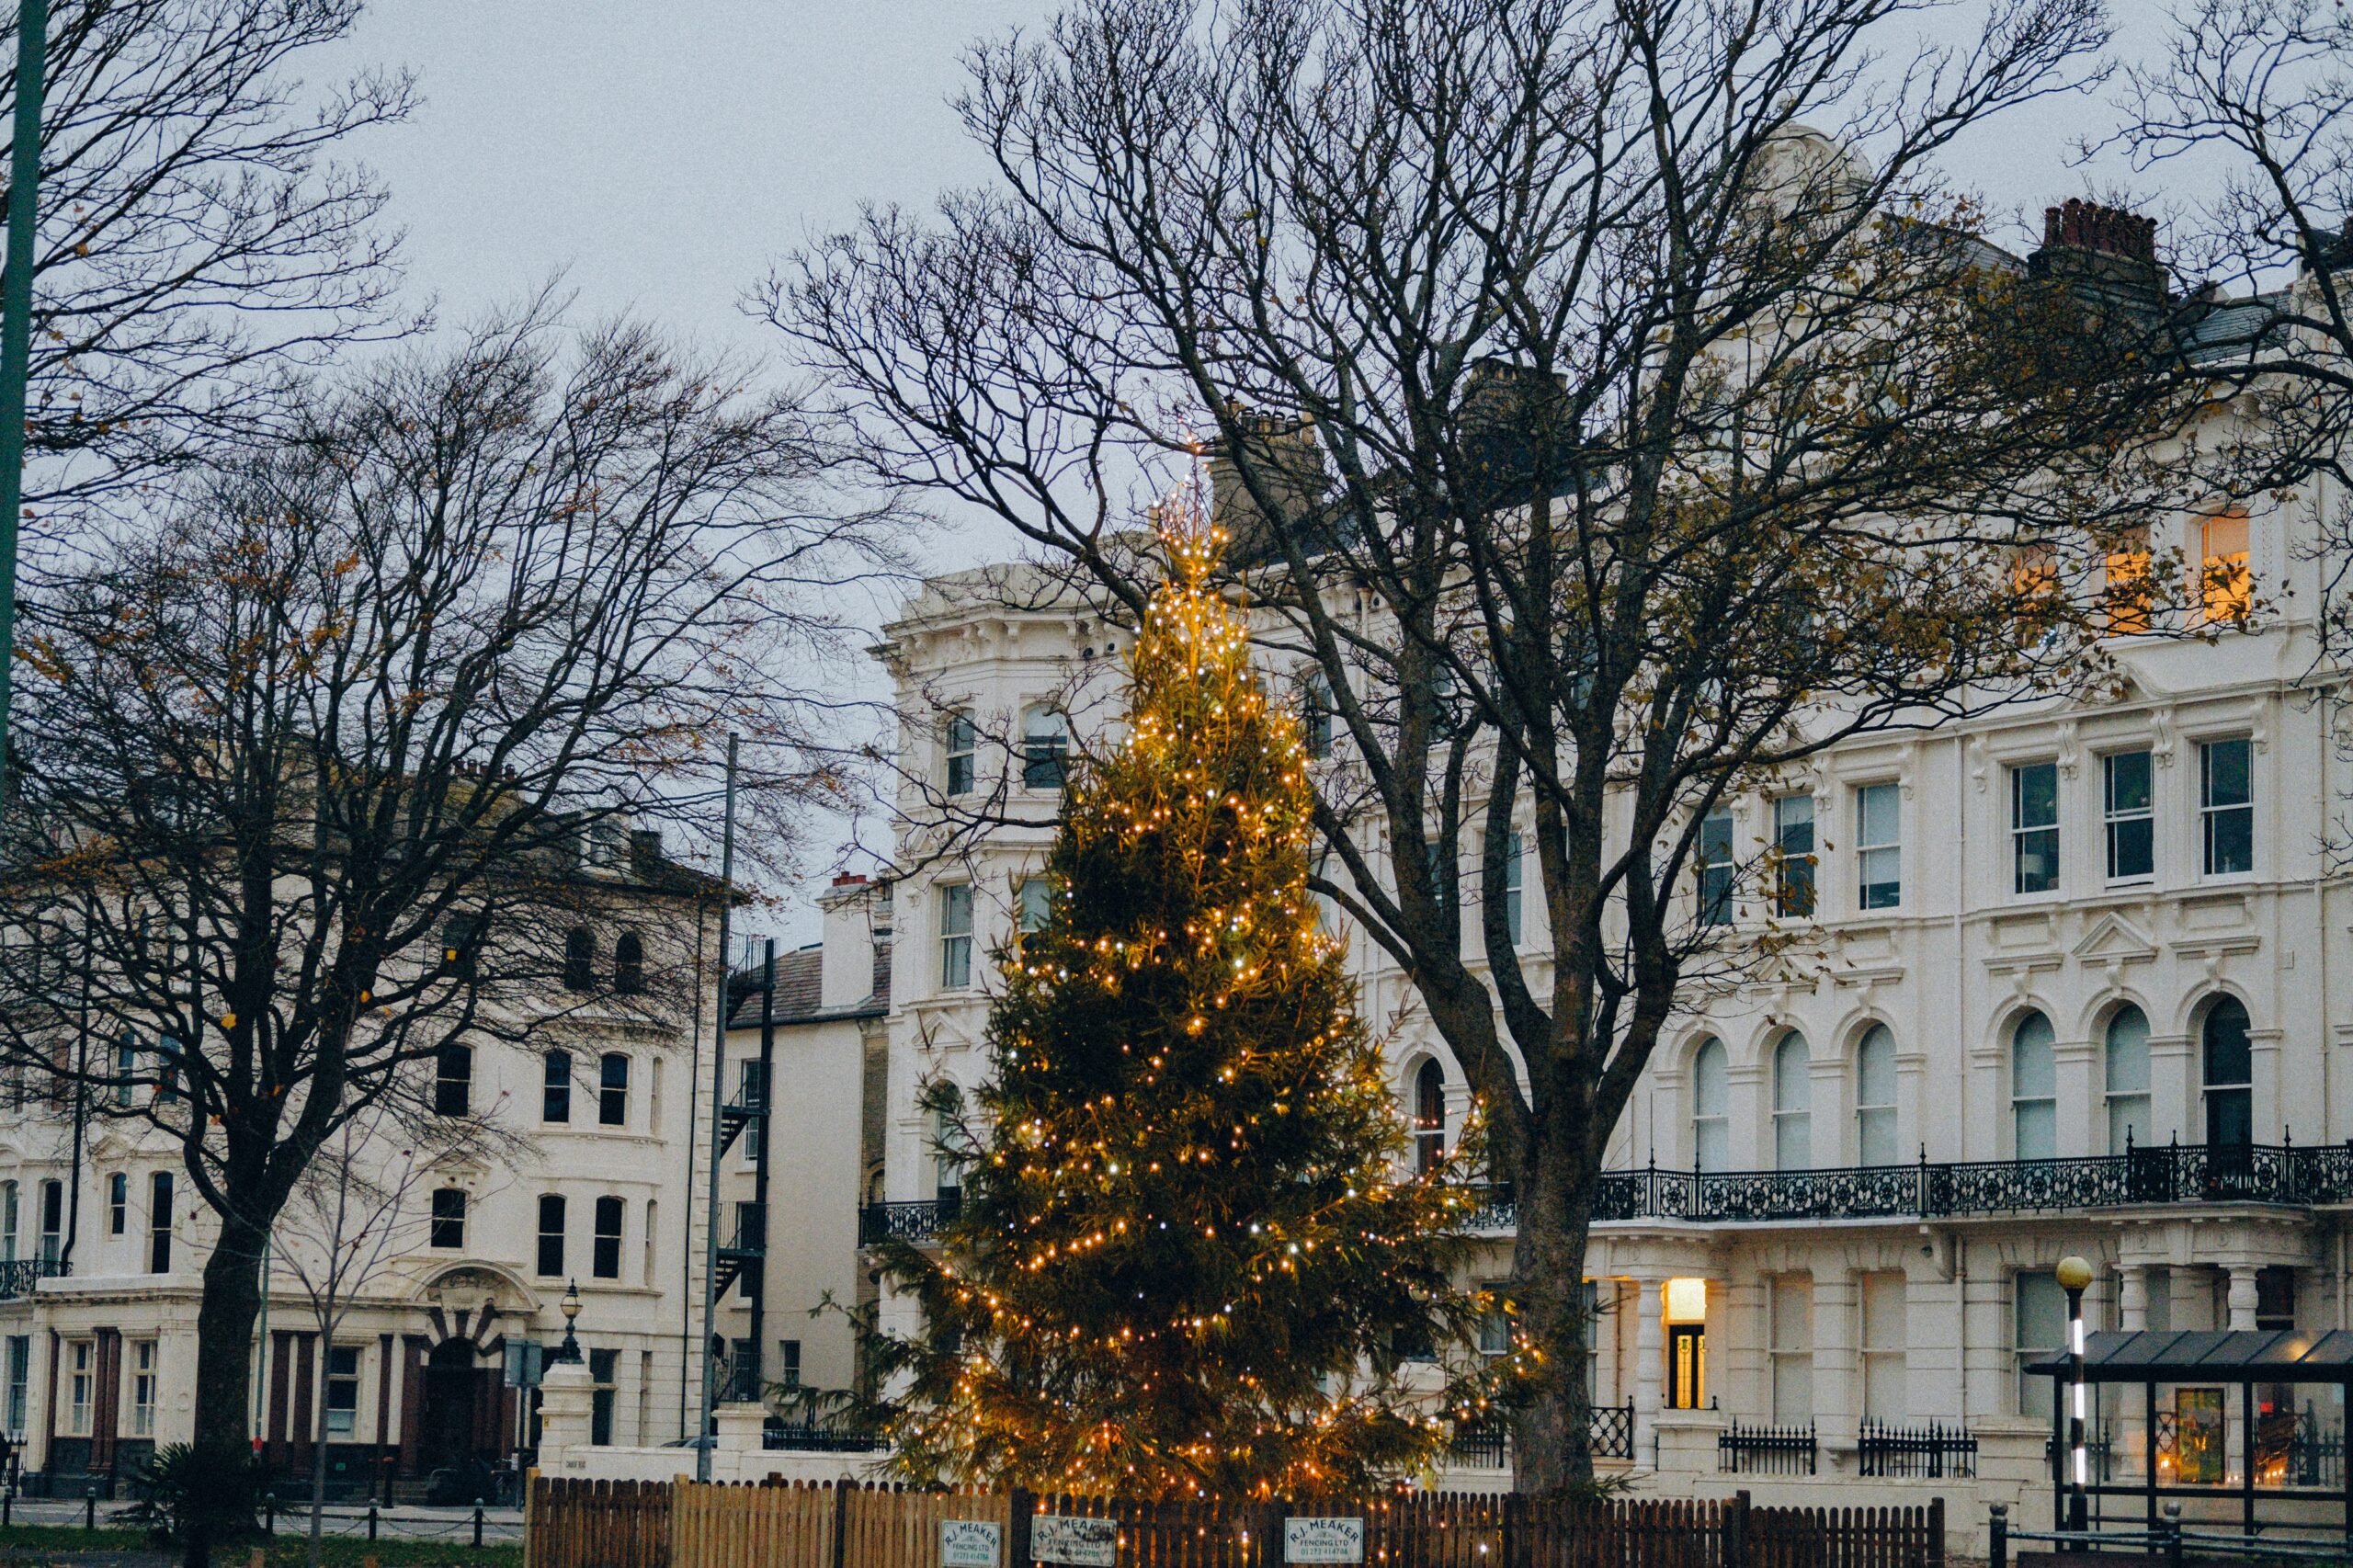 Christmas in Brighton, with white buildings in the background